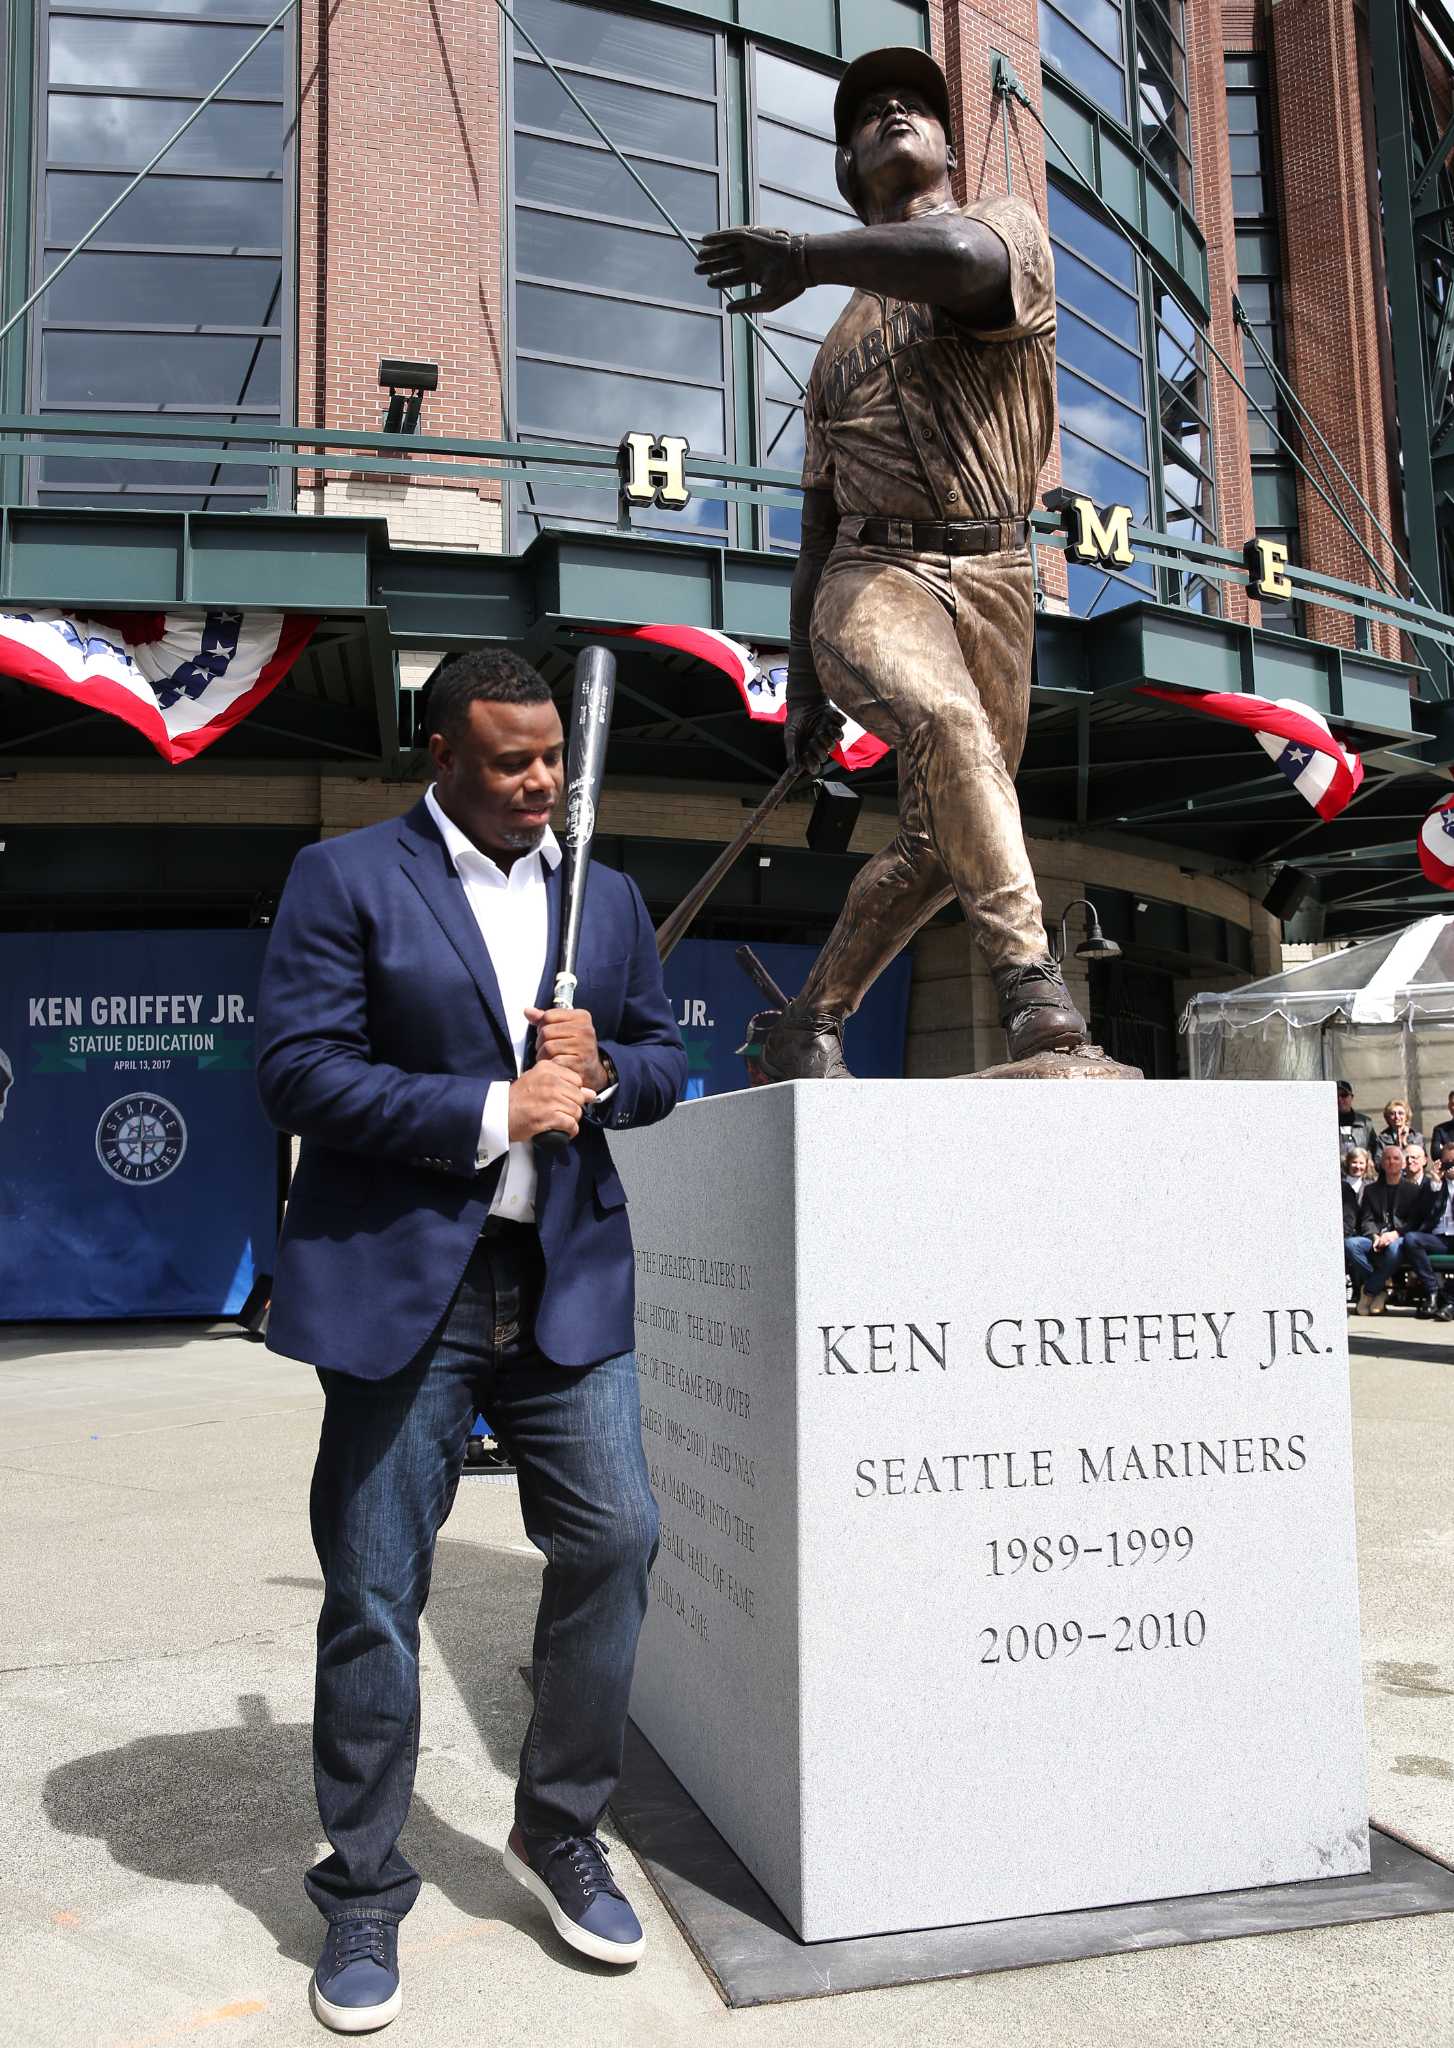 Ken Griffey Jr. statue to be unveiled outside Safeco Field